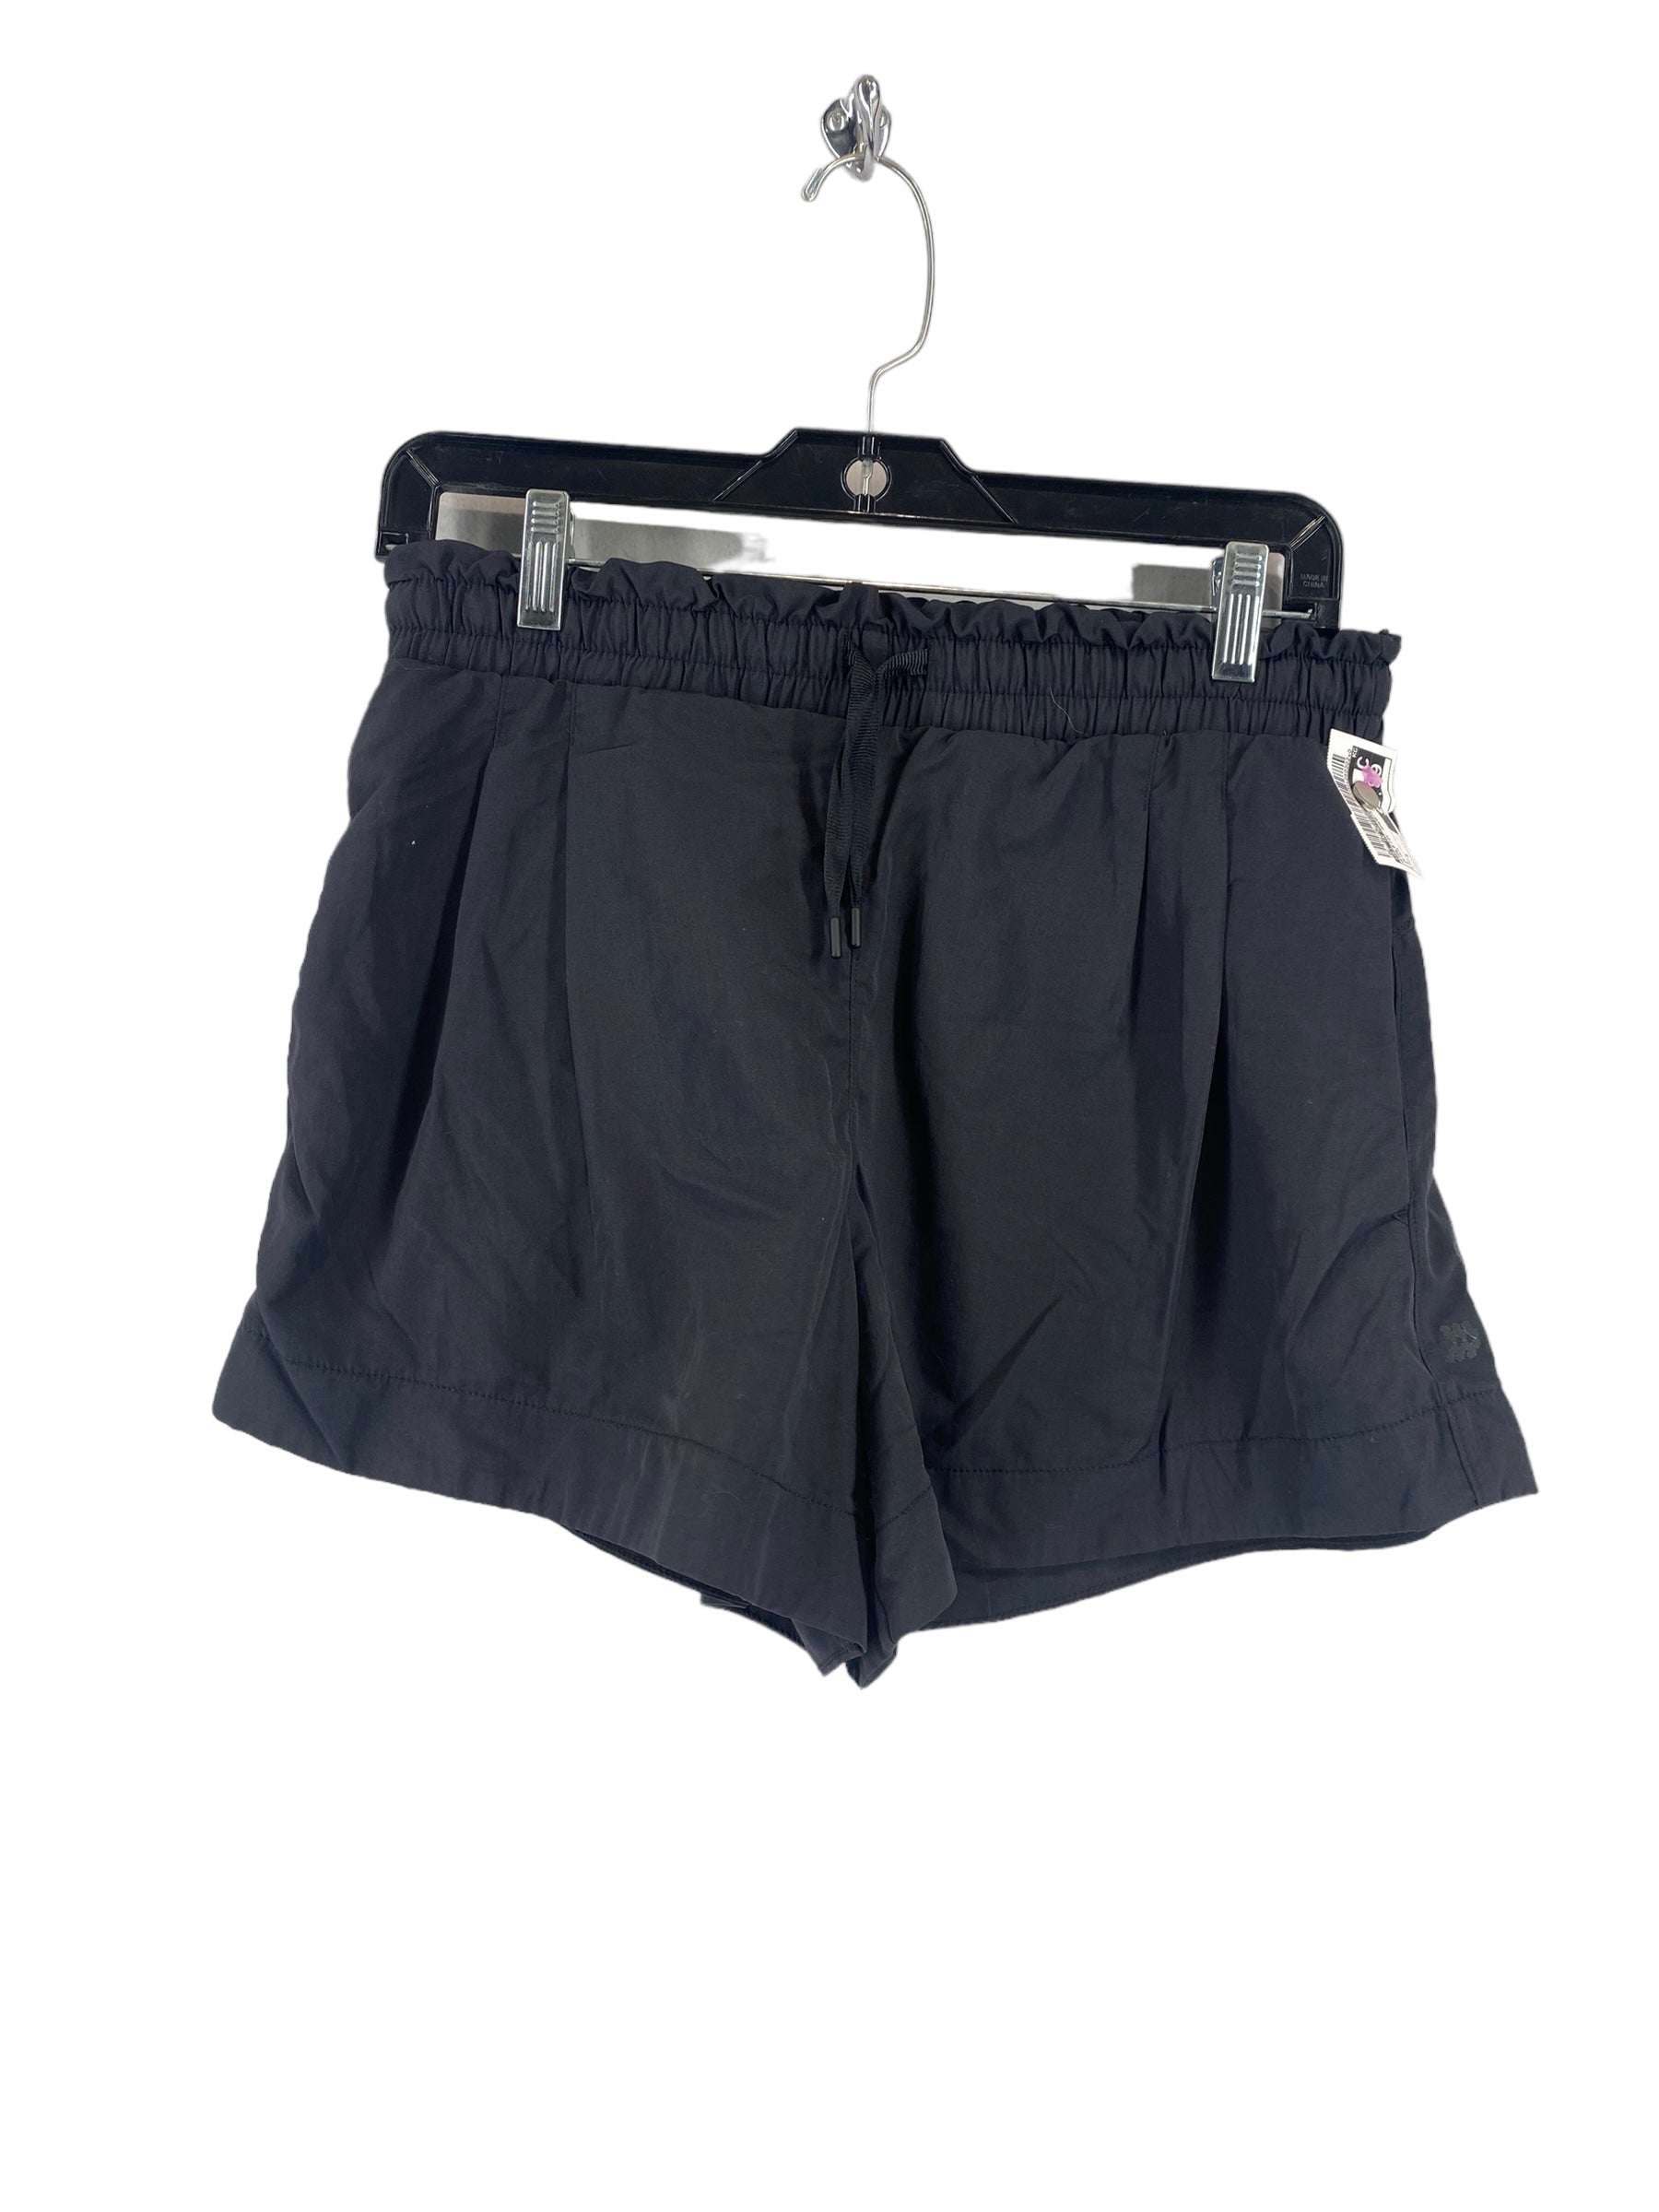 Athletic Shorts By All In Motion Size: S